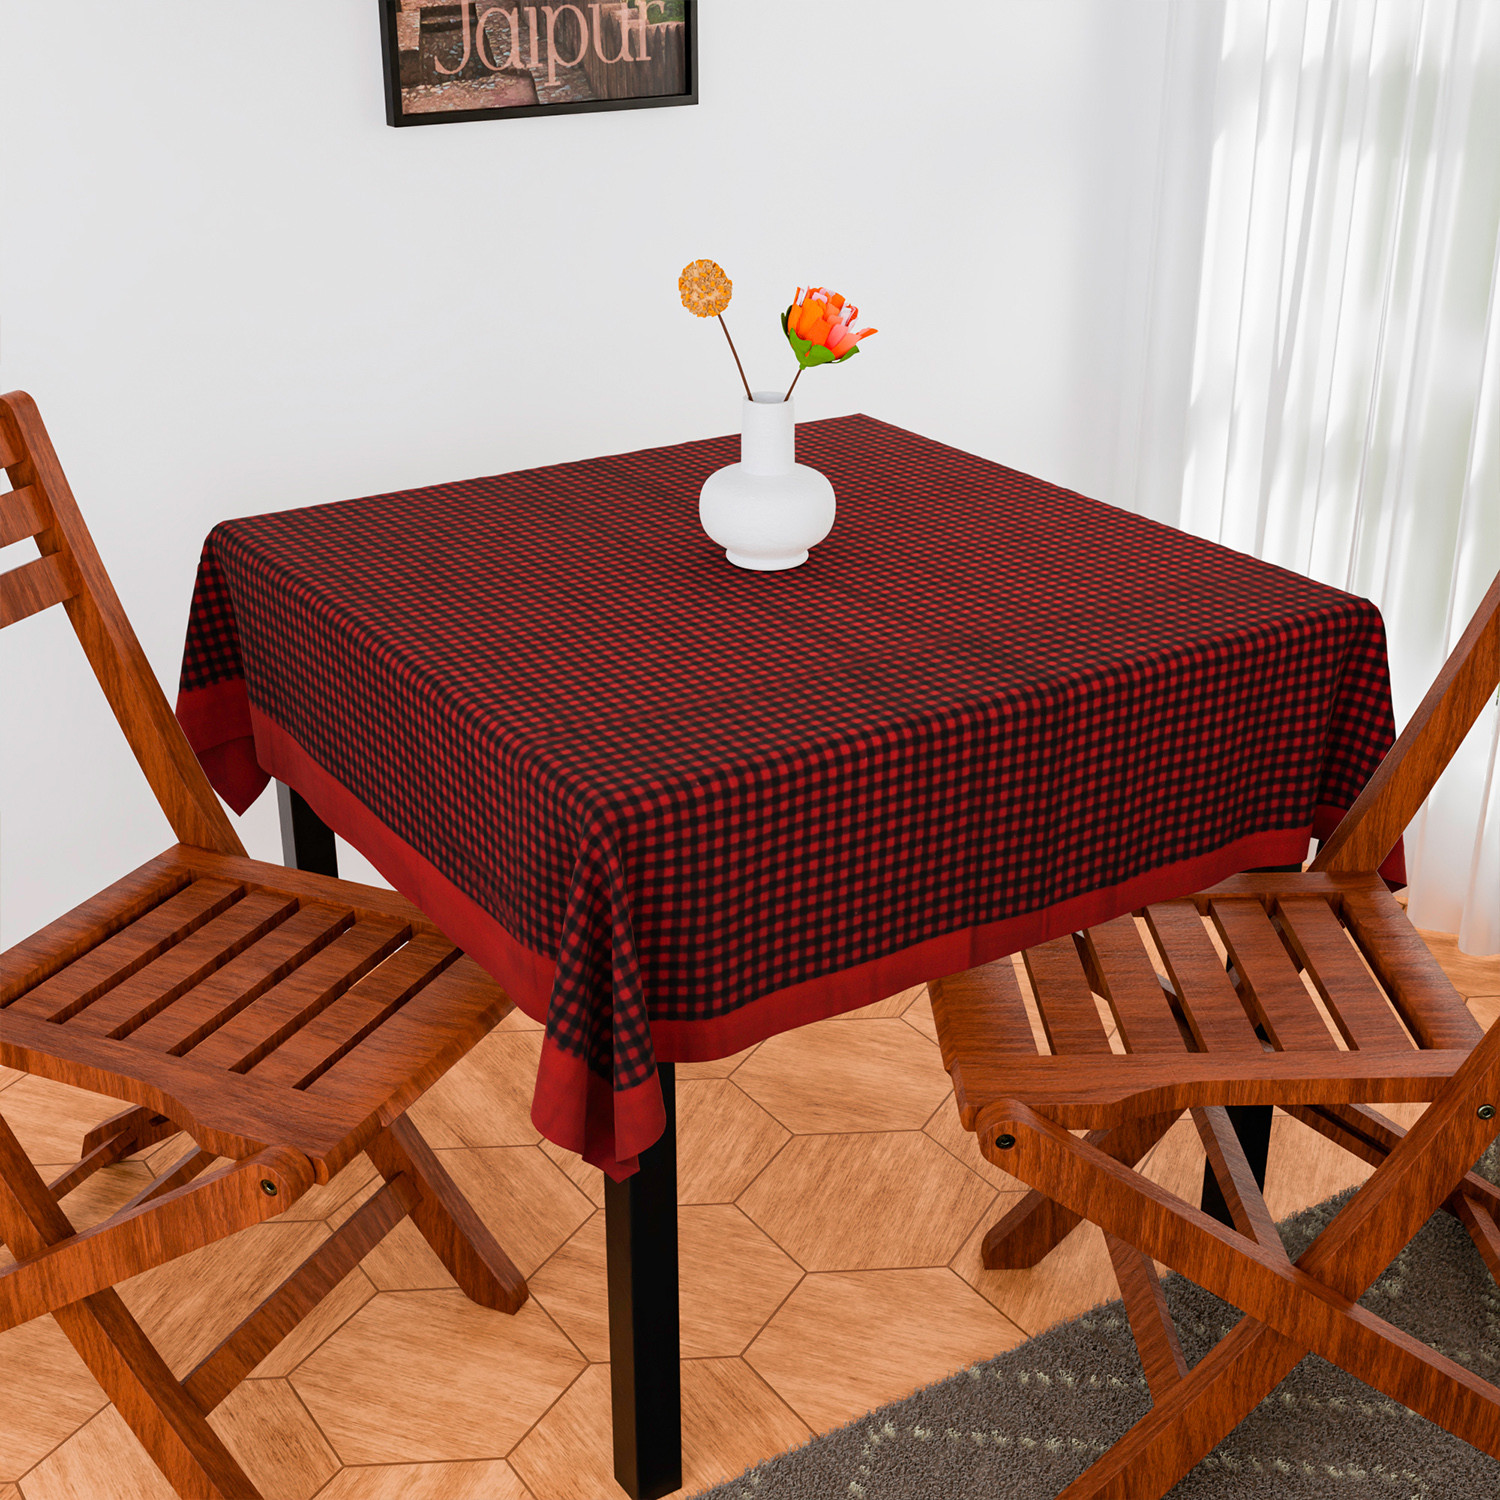 Kuber Industries Table Cover | Cotton Dining Table Cover | Table Cloth | Center Table Cover | Table Cover for Kitchen Table | Barik Check Table Cover for Hall Décor | 54 Inch | Maroon